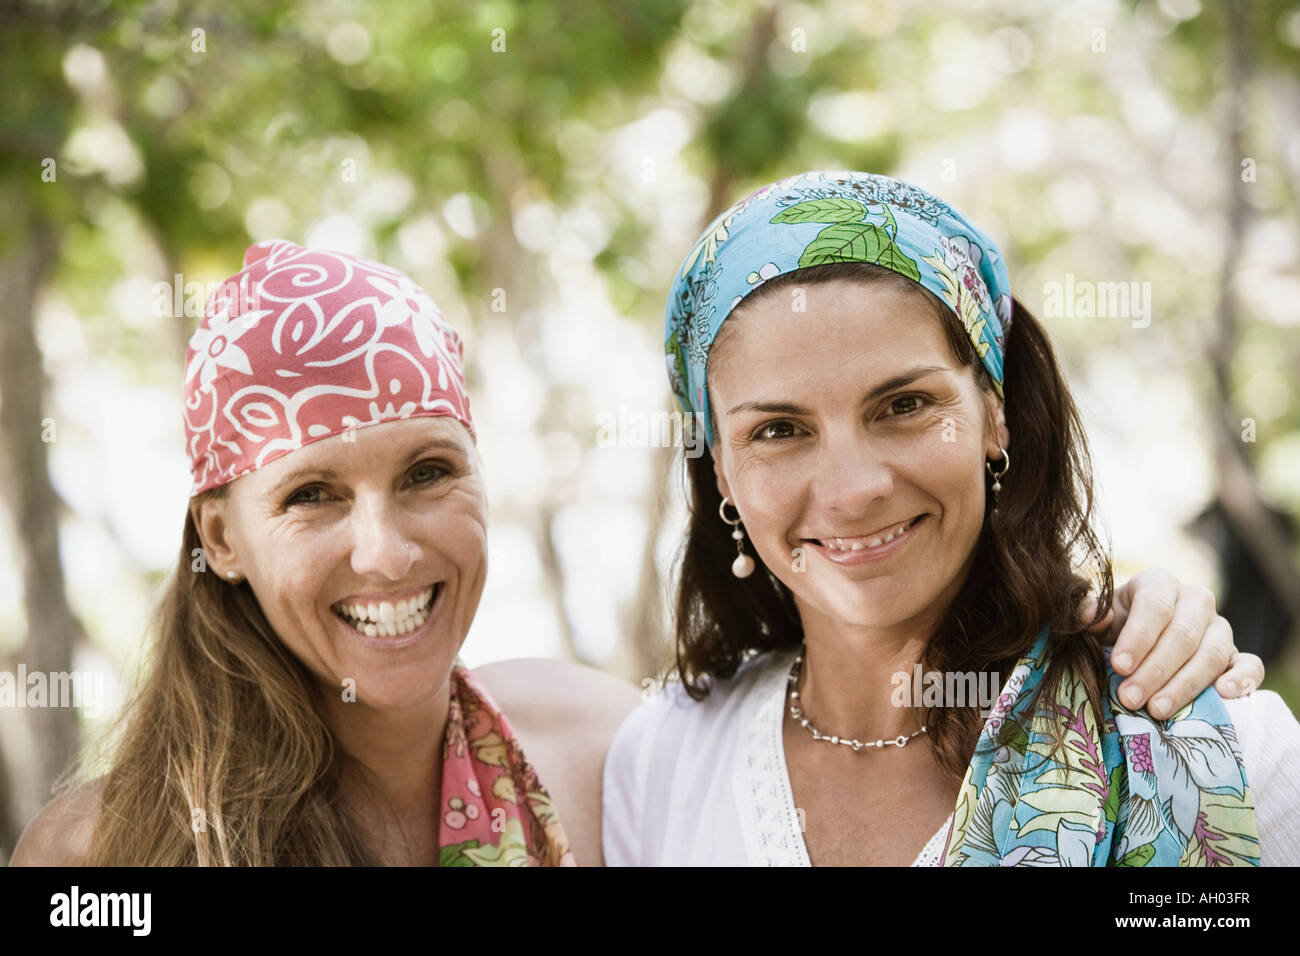 Portrait of two mid adult women smiling Stock Photo